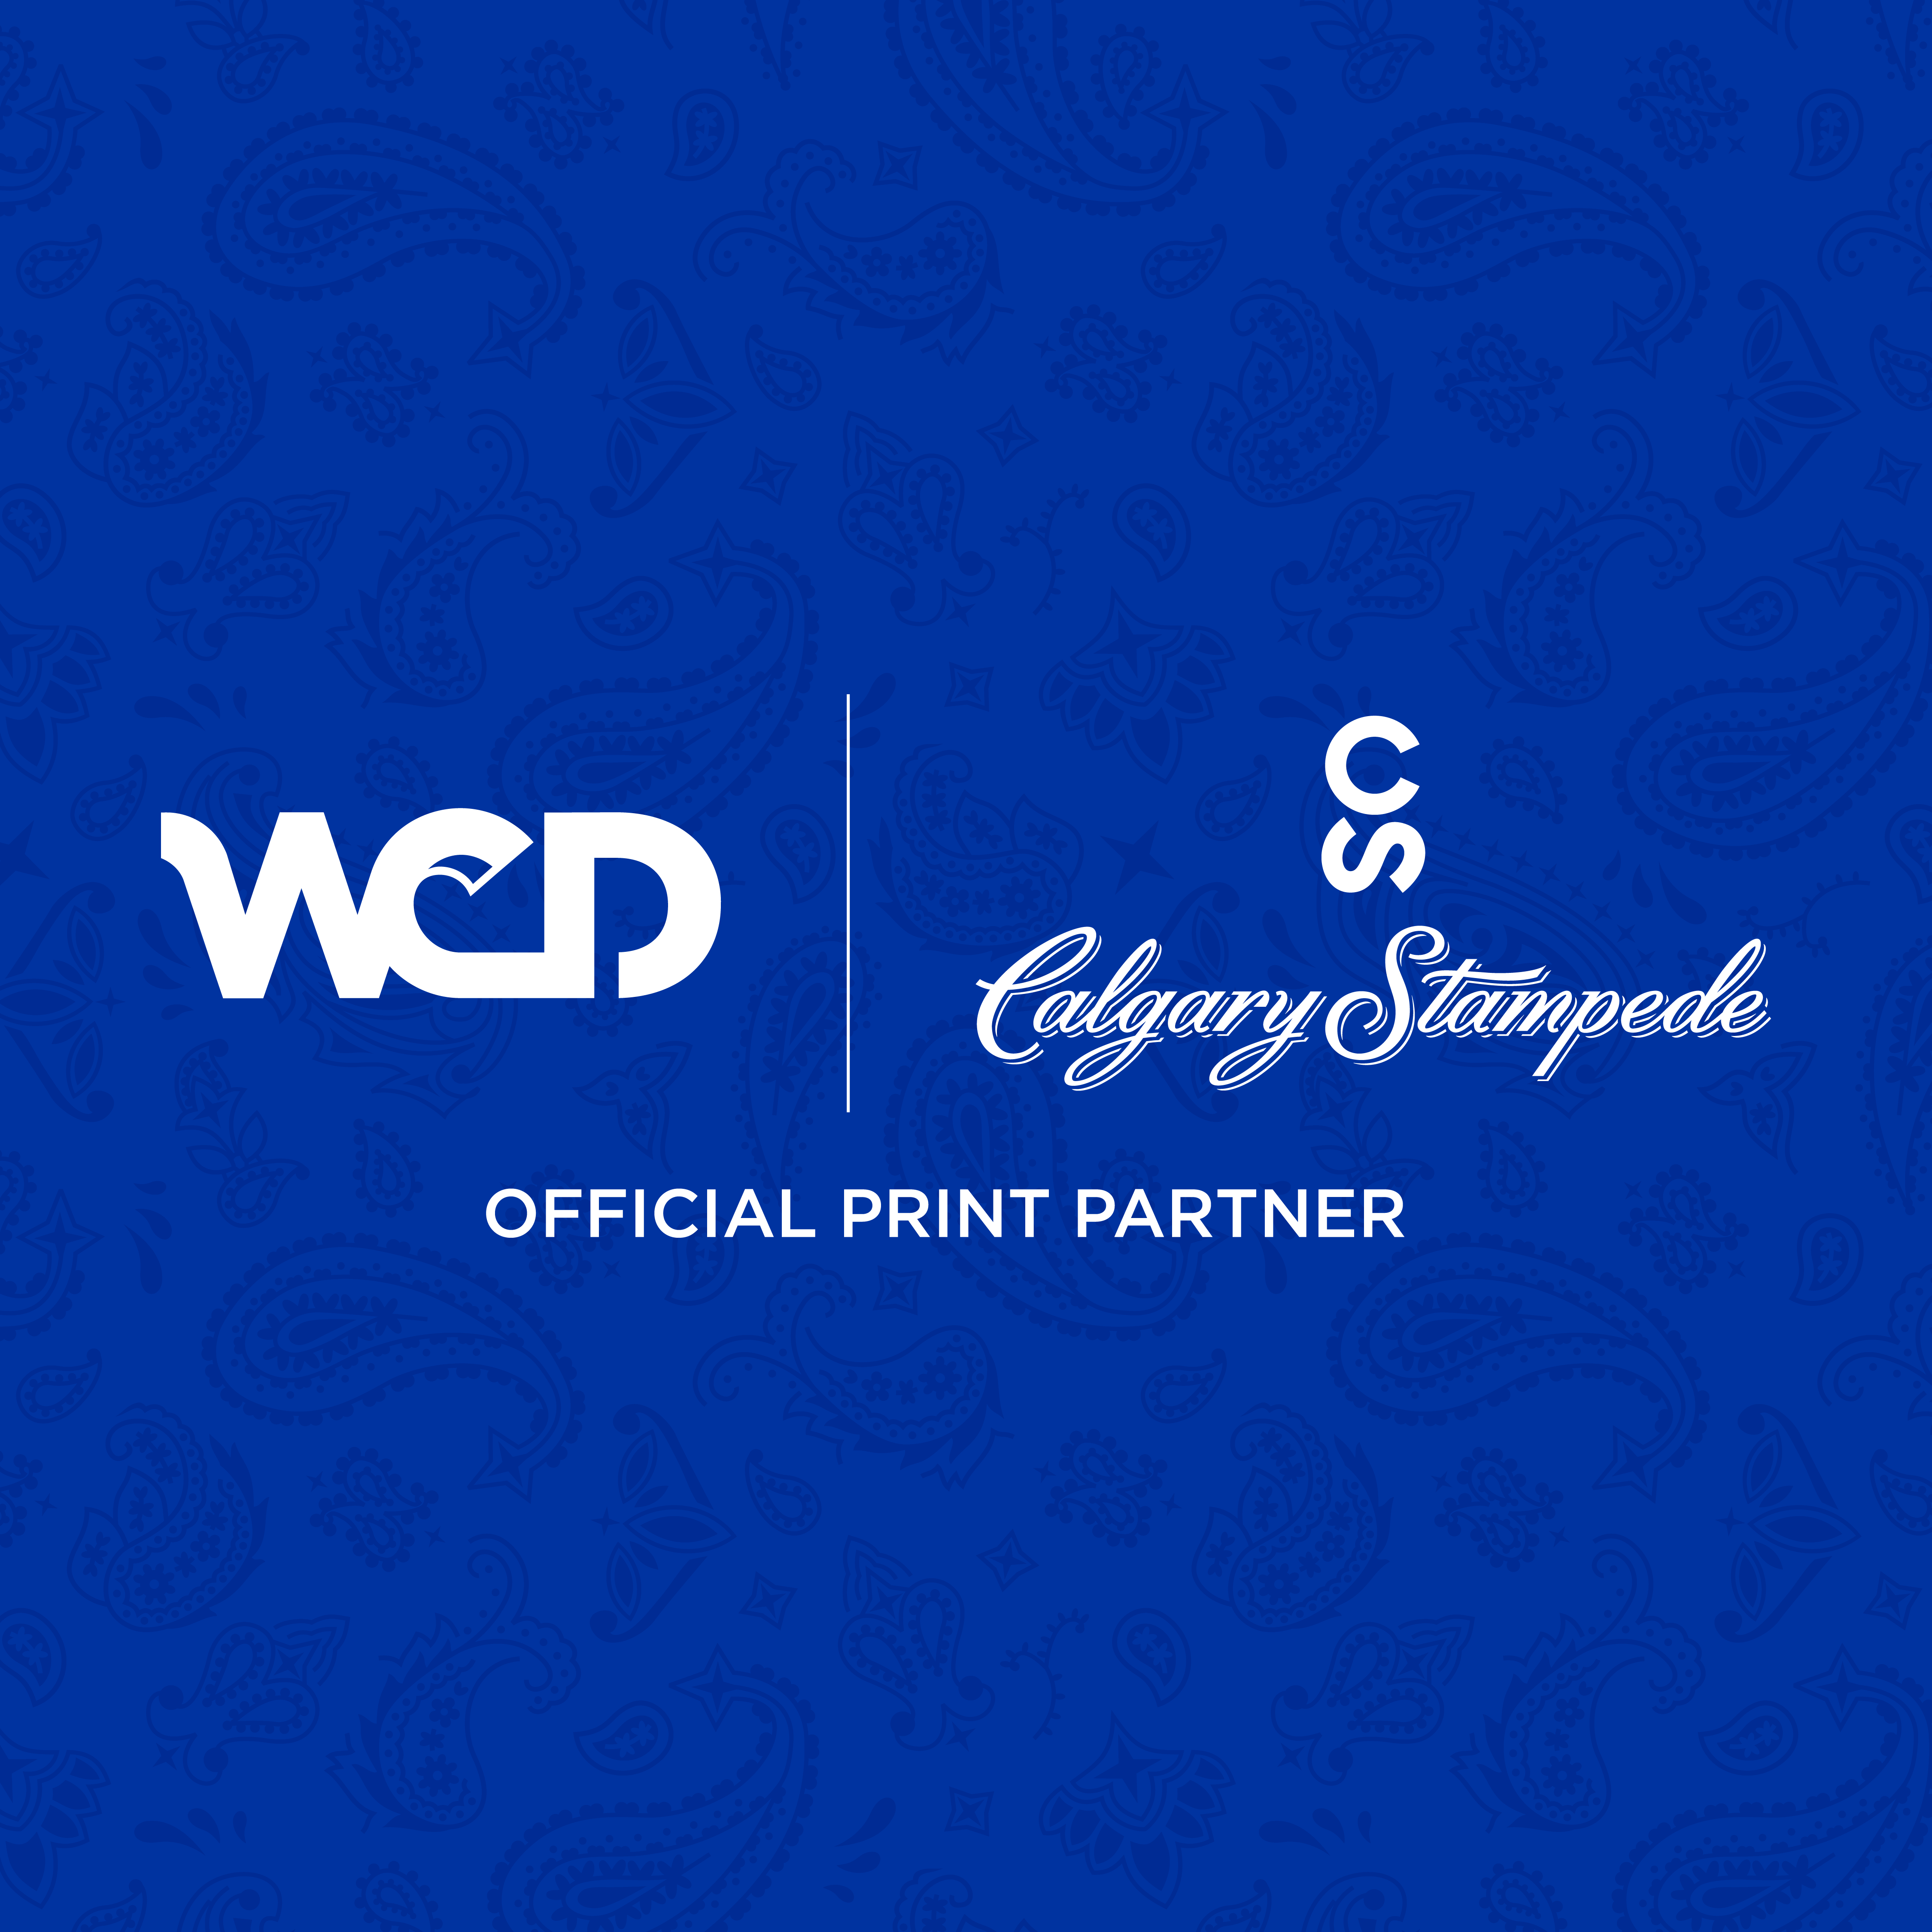 WCD Official Print Partner of the Calgary Stampede